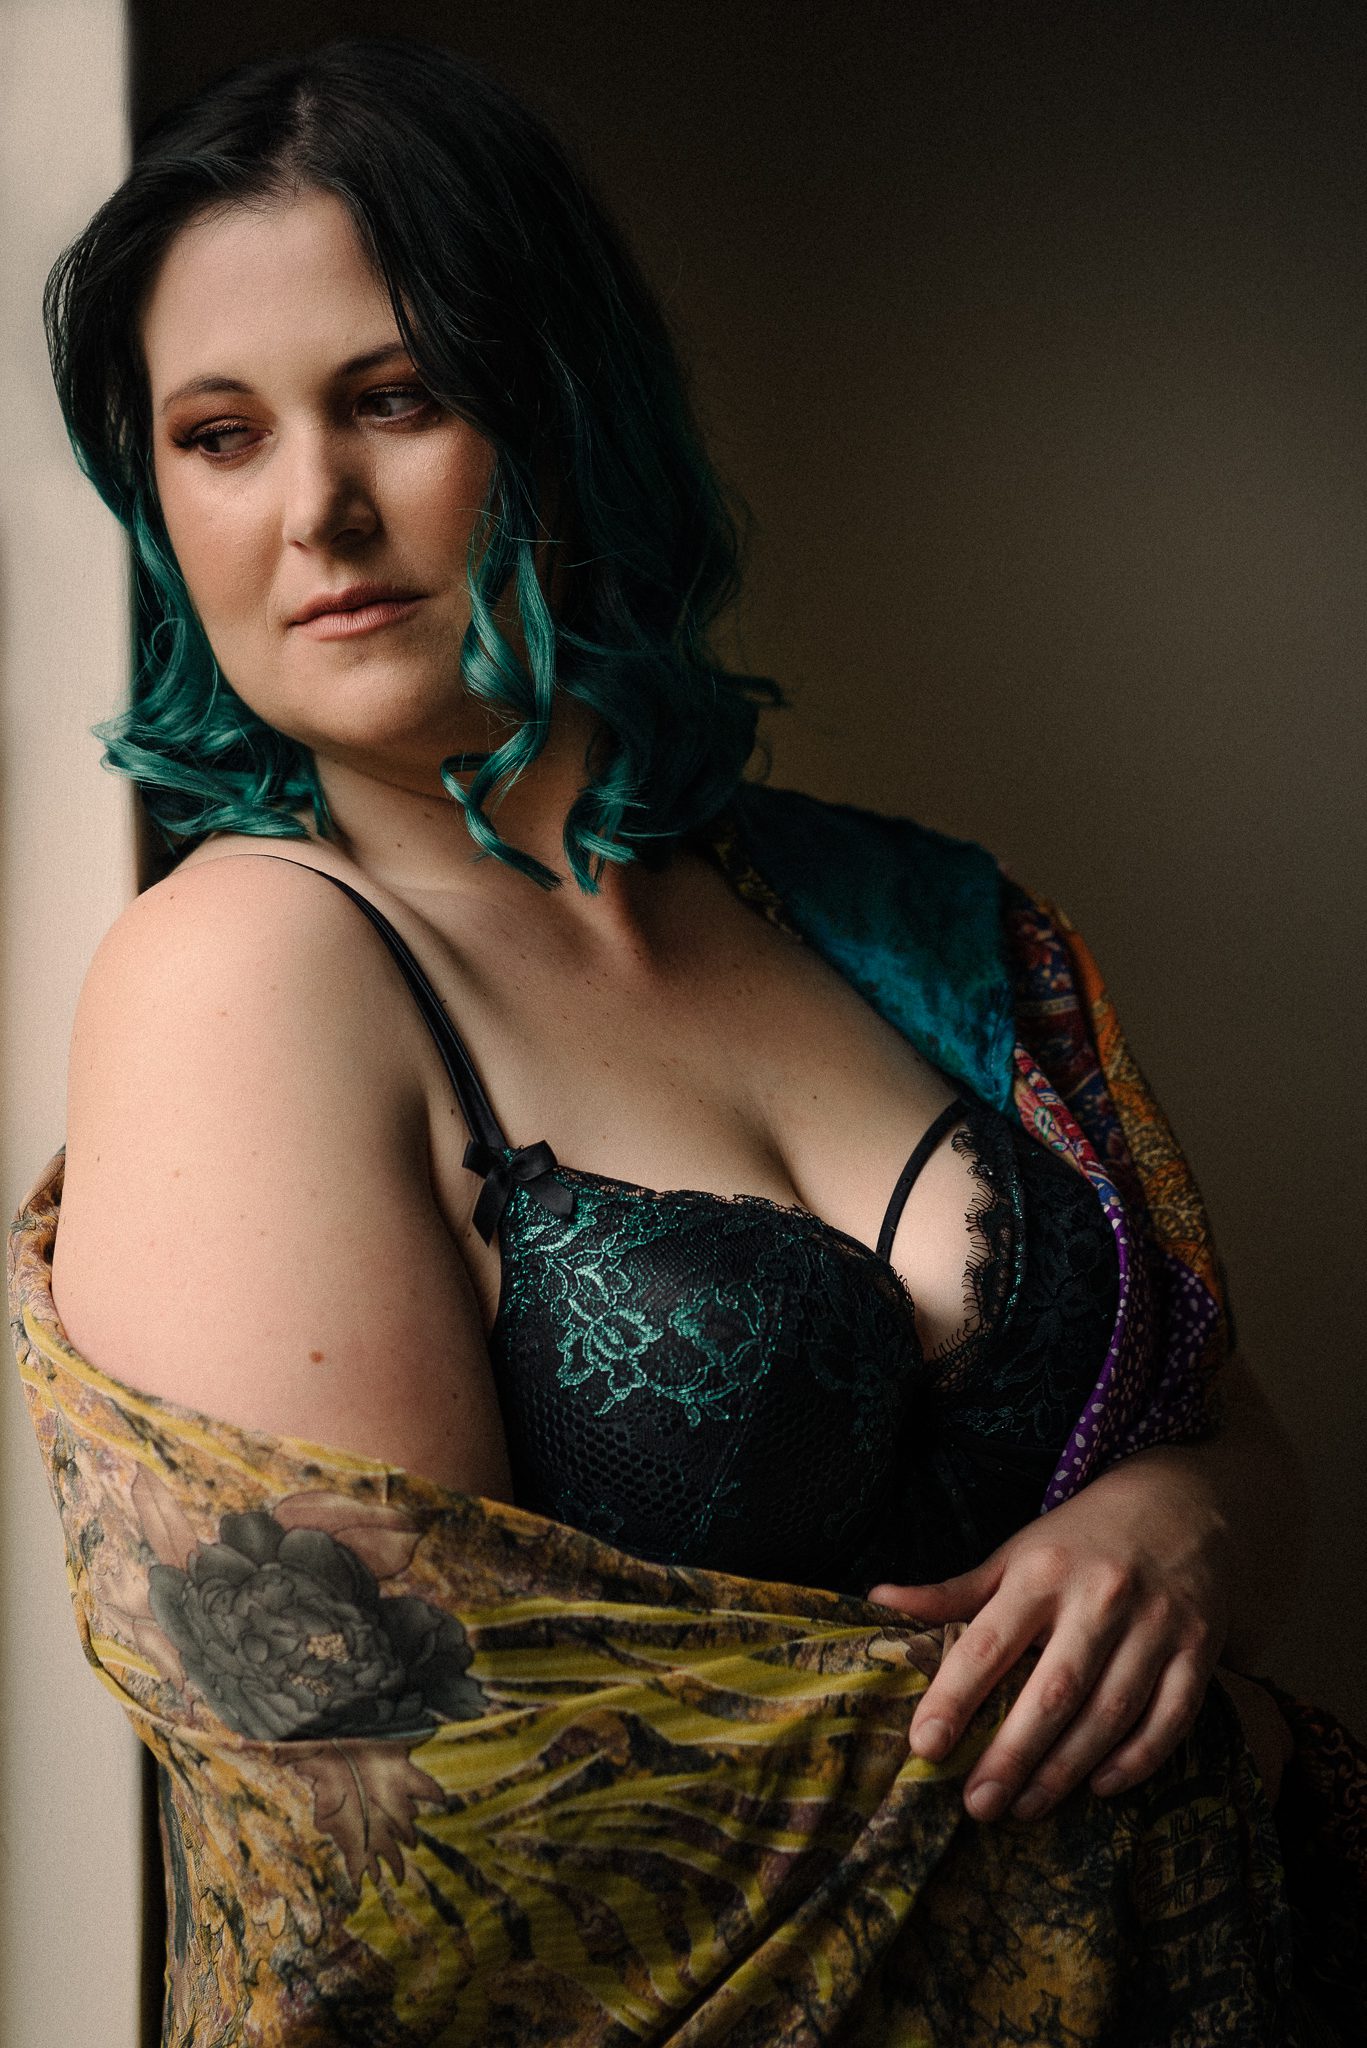 Boudoir portrait of a lady with green hair and bra, wrapped in a bright shawl